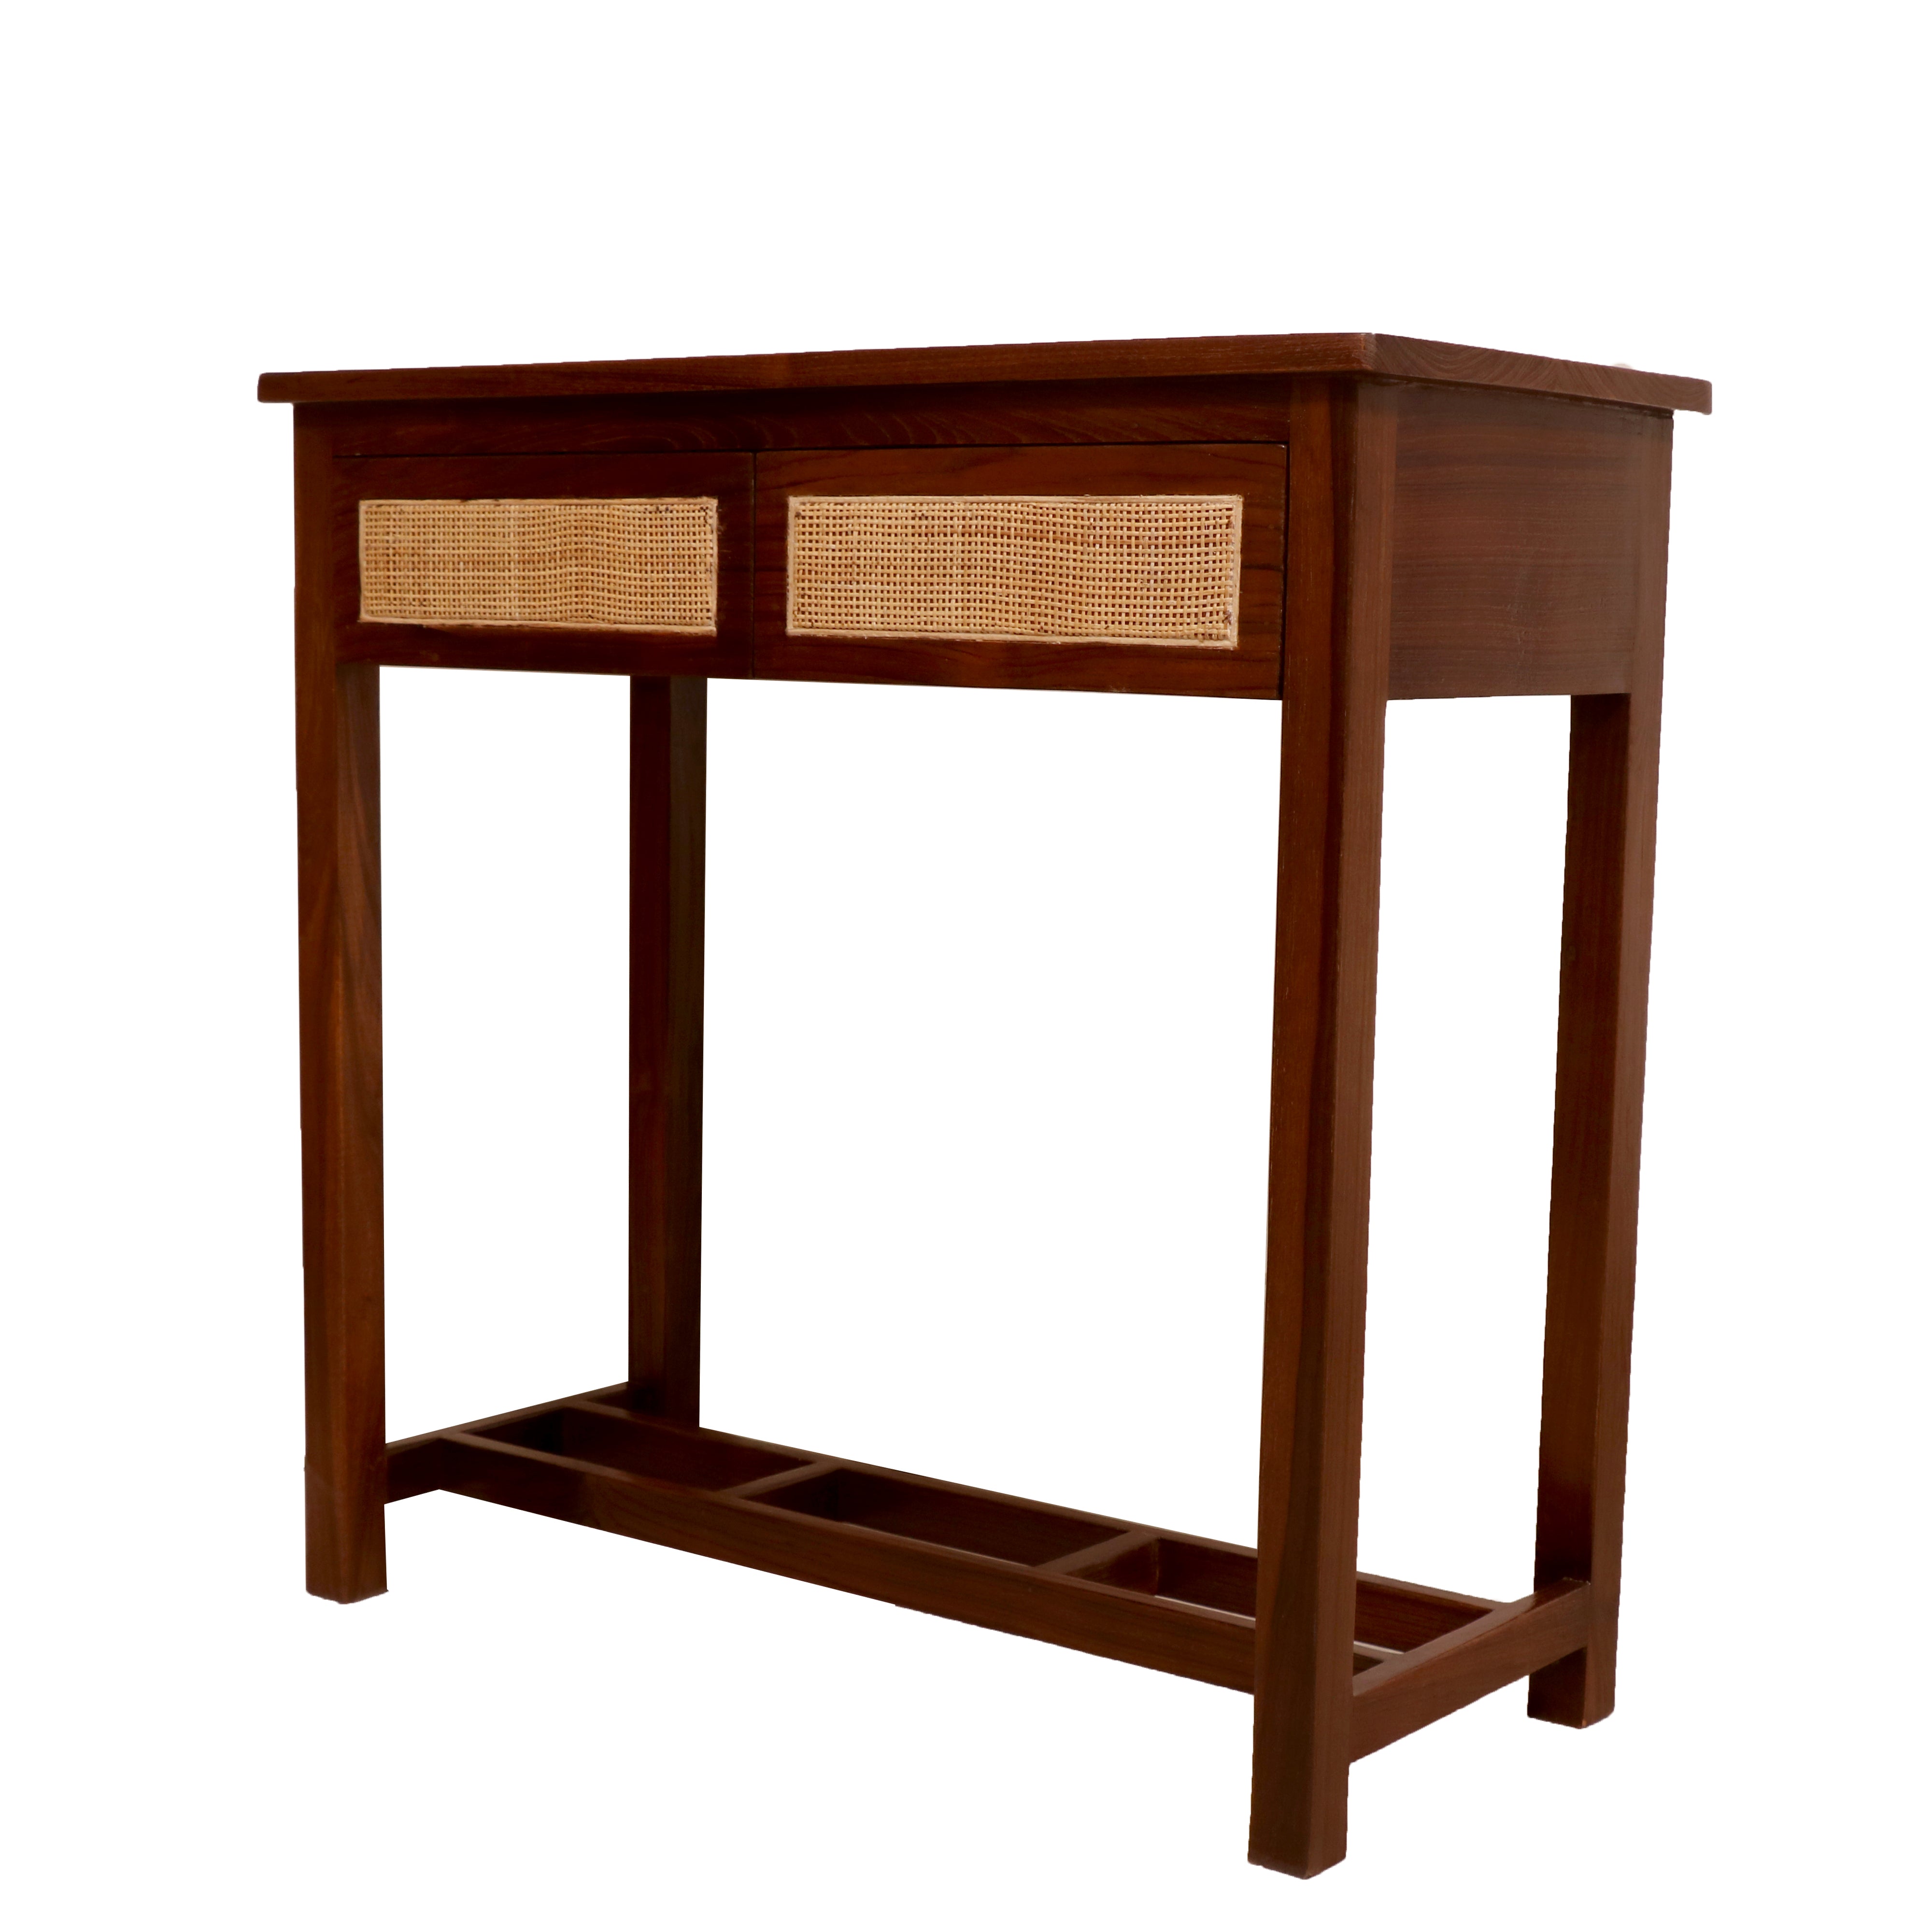 2 Cane Drawer Study Table Study Table